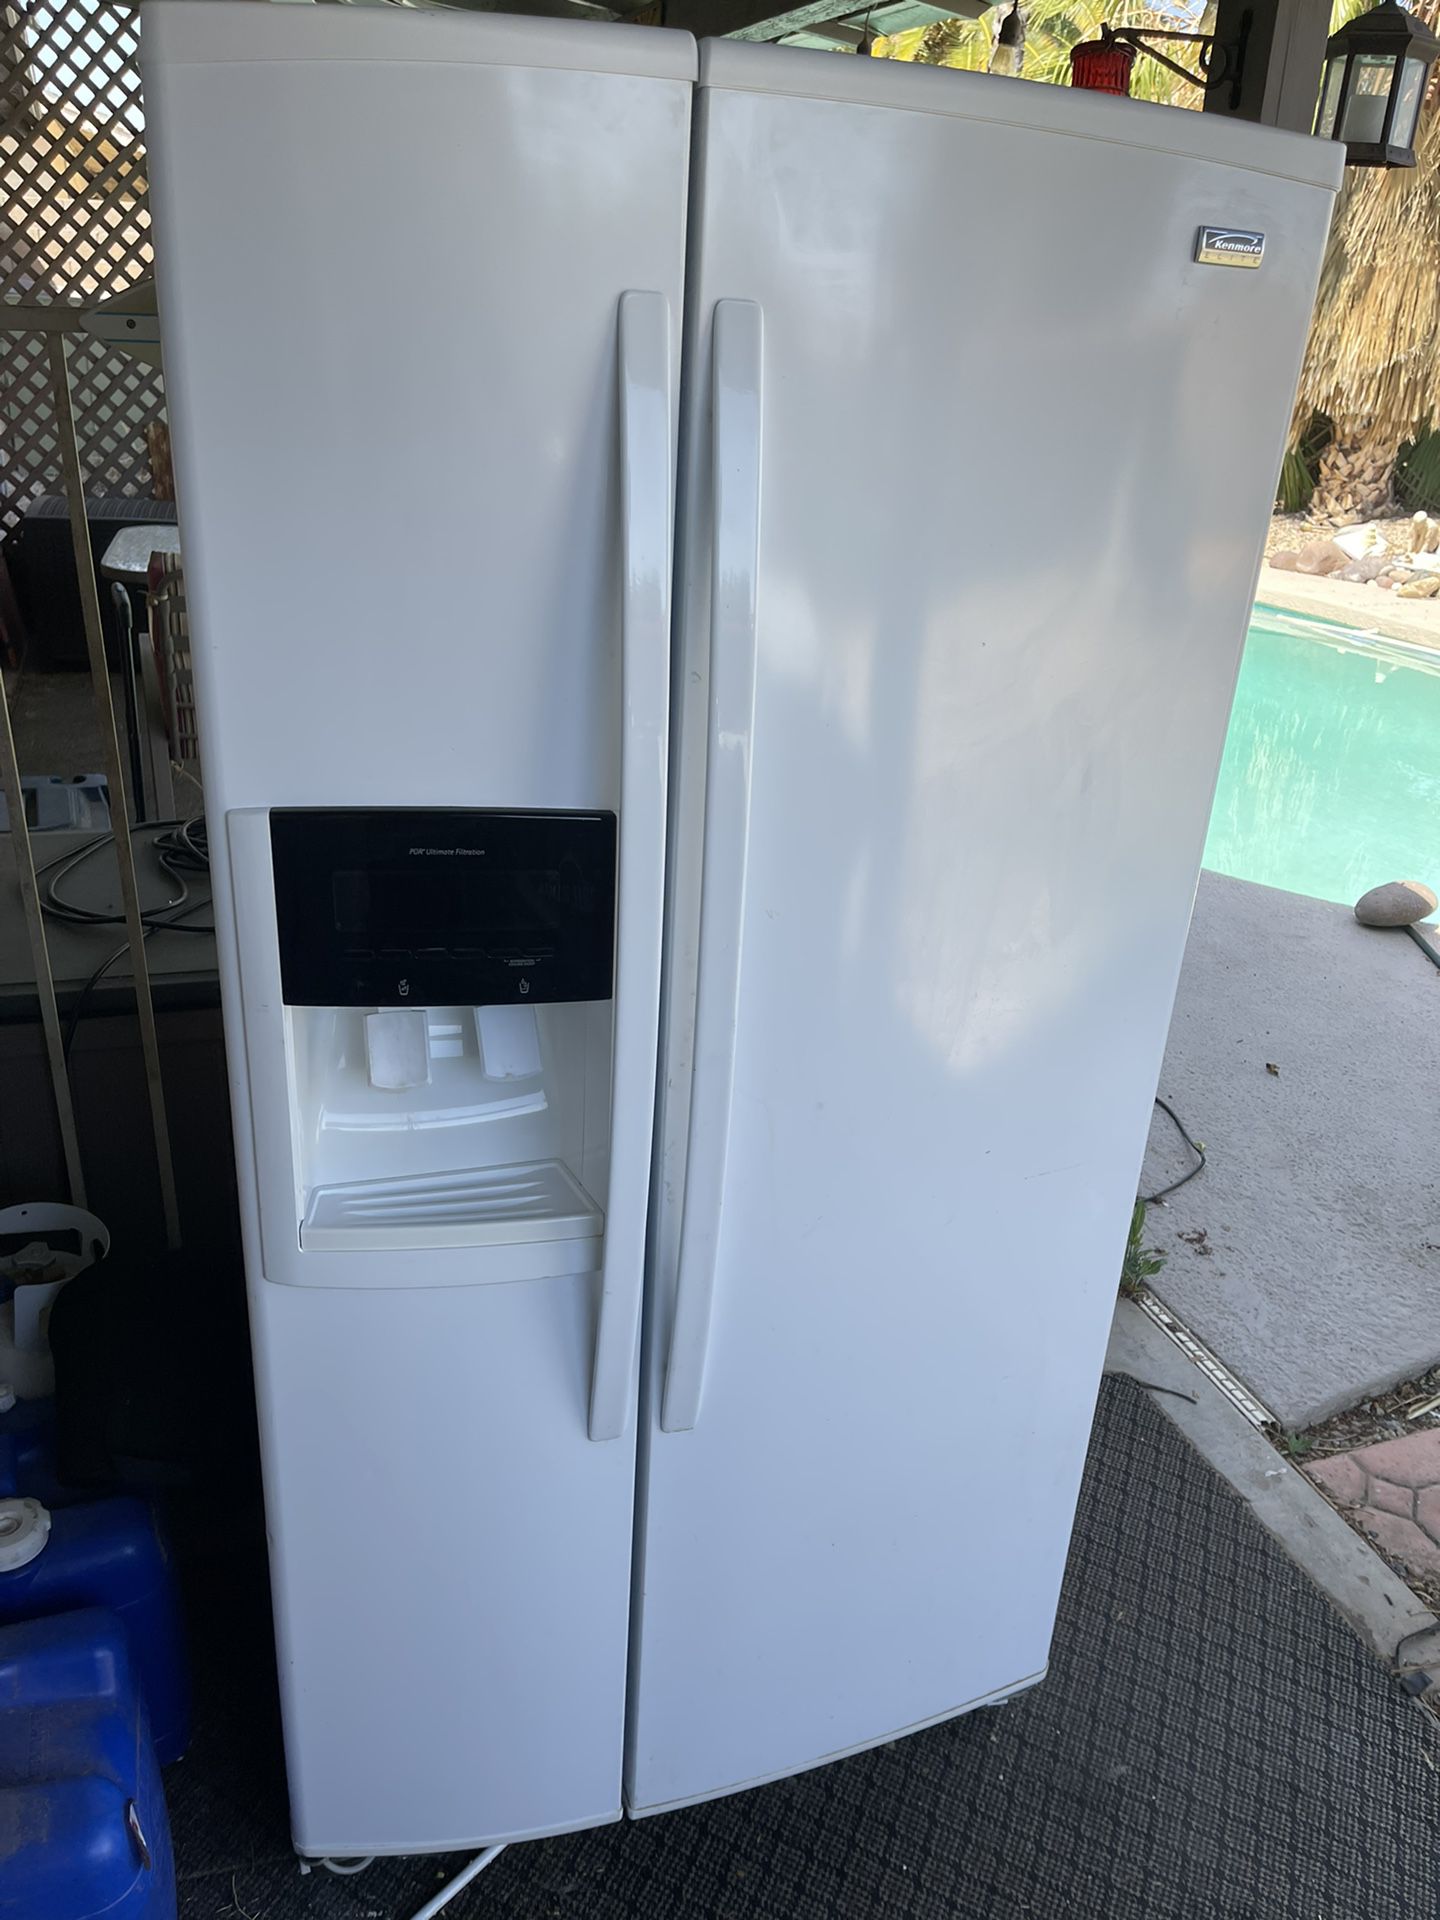 Kenmore Elite White Counter Depth Refrigerator With Working Icemaker And Water Dispenser (re-priced for quick sale)